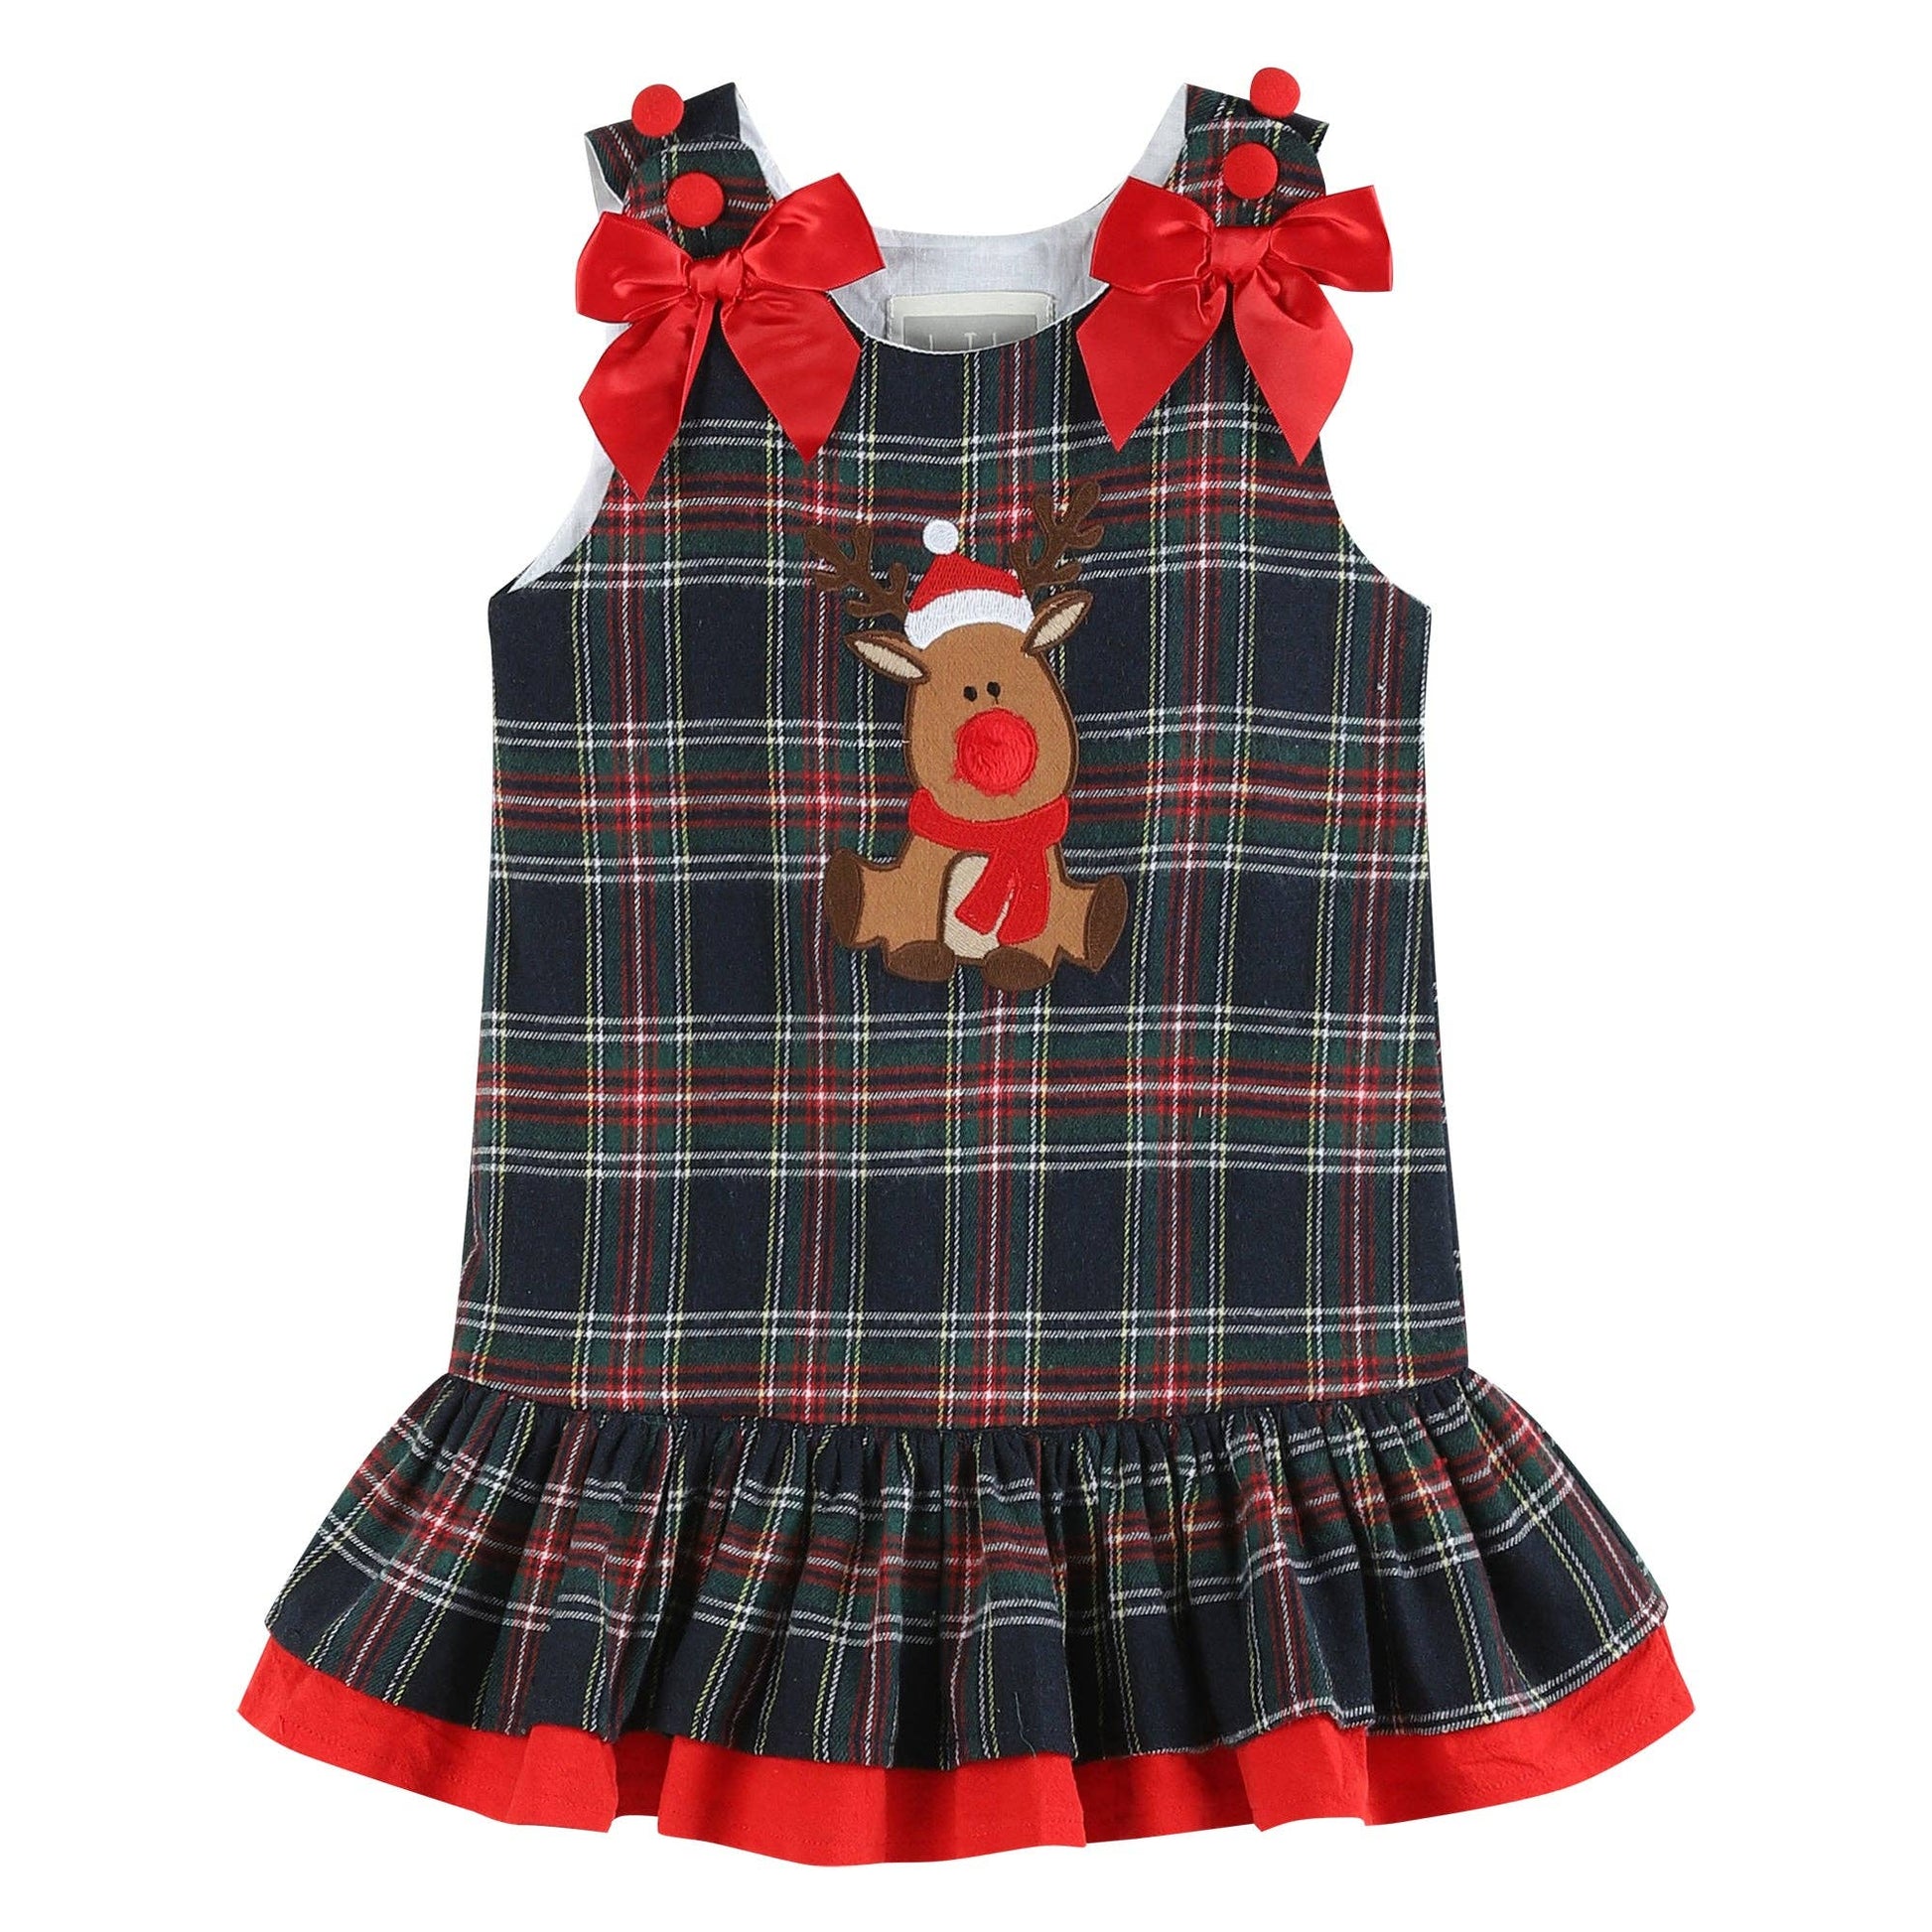 A Navy and Red Plaid Reindeer Ruffle Dress: 3-6M by Lil Cactus, perfect for Christmas.